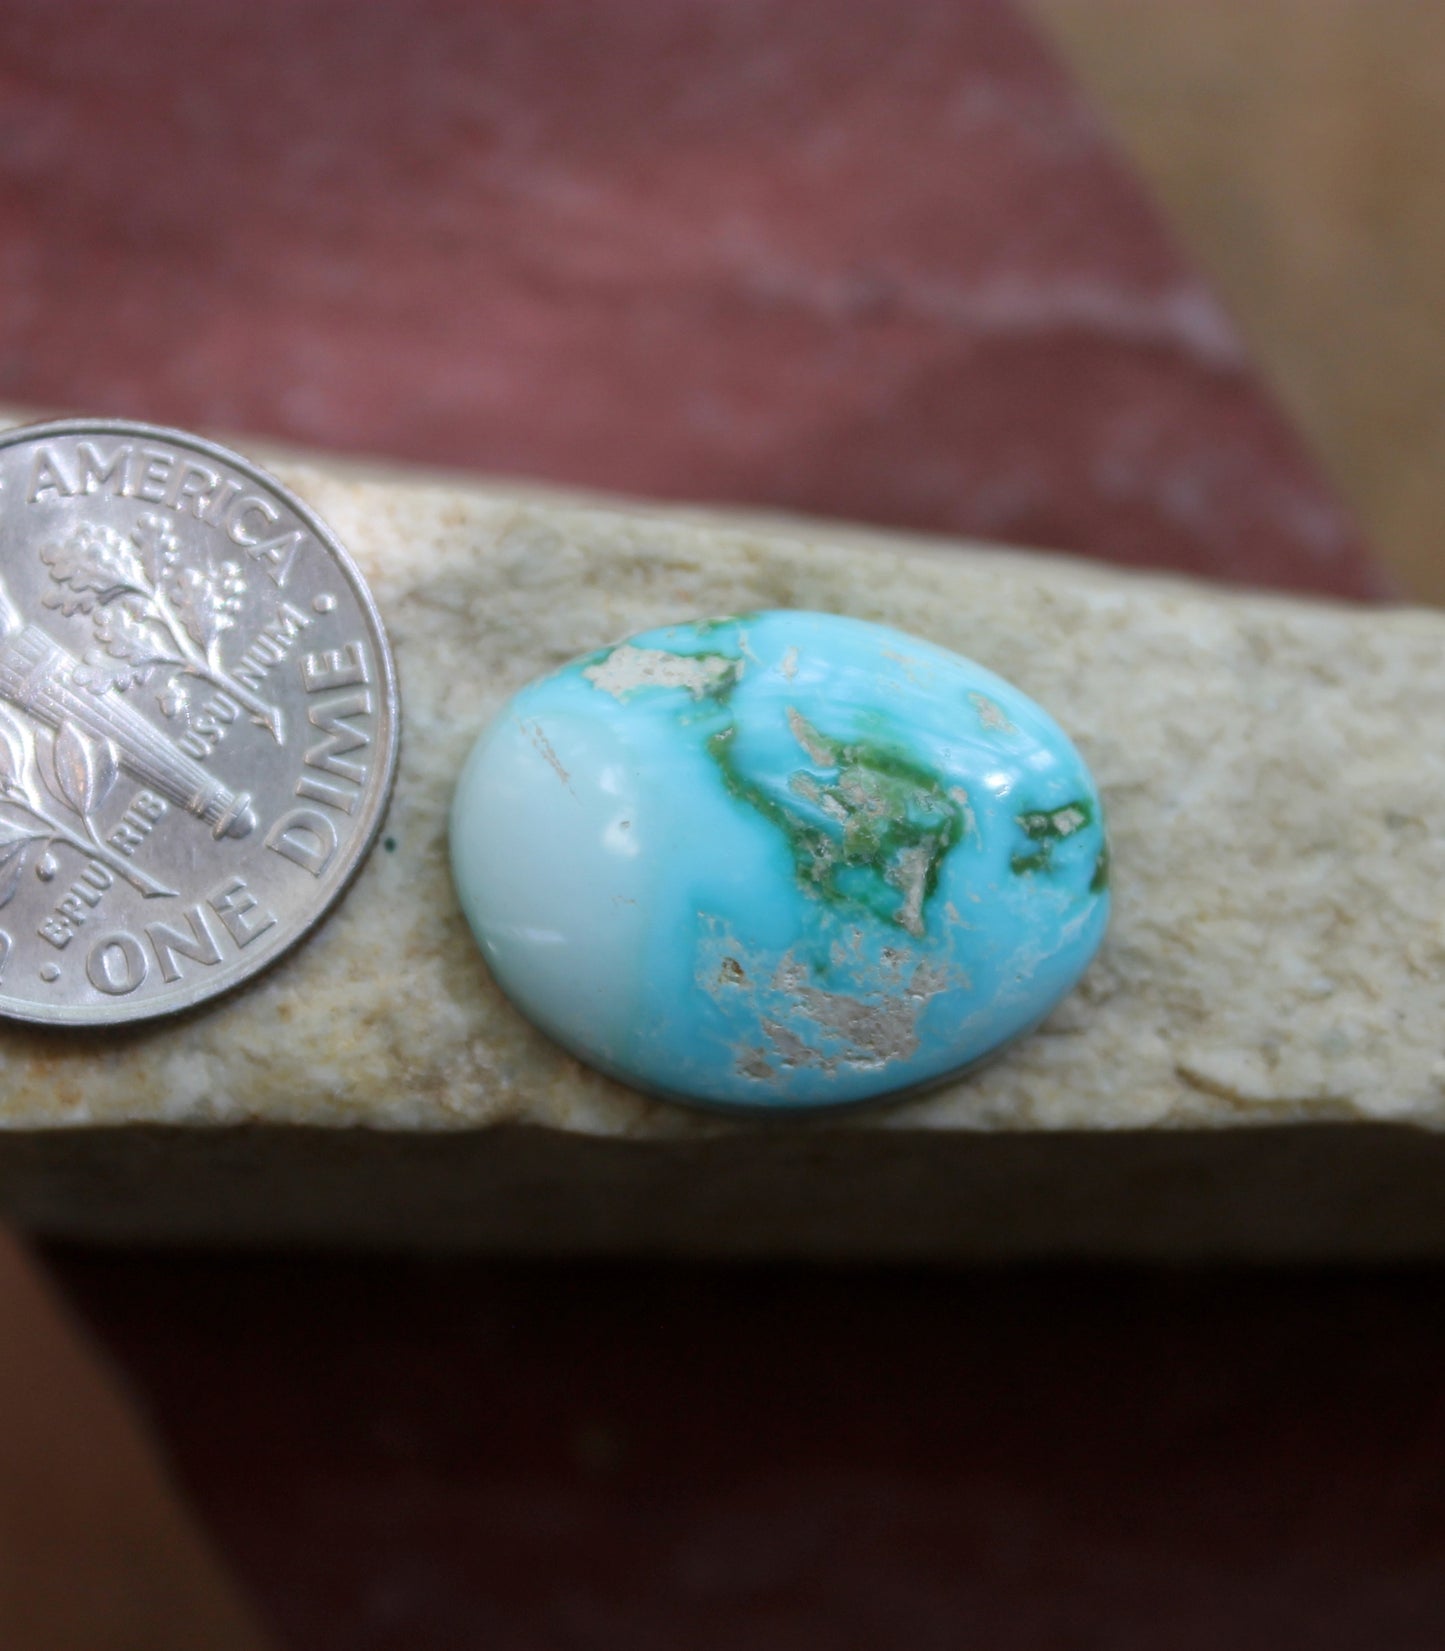 9 carat color change Stone Mountain Turquoise cabochon oval